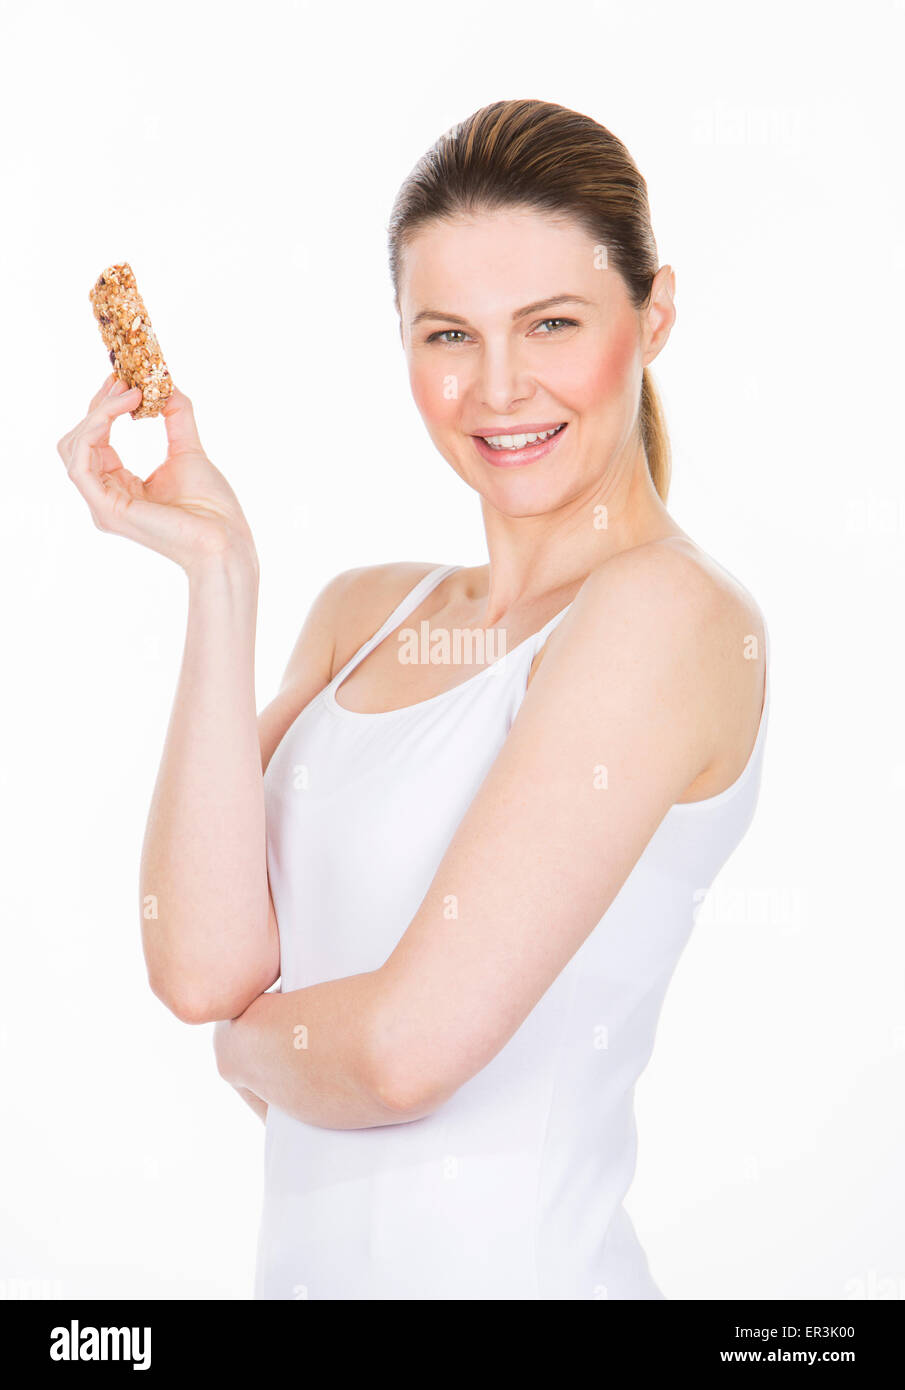 woman with white dress holding a healthy fruit bar Stock Photo